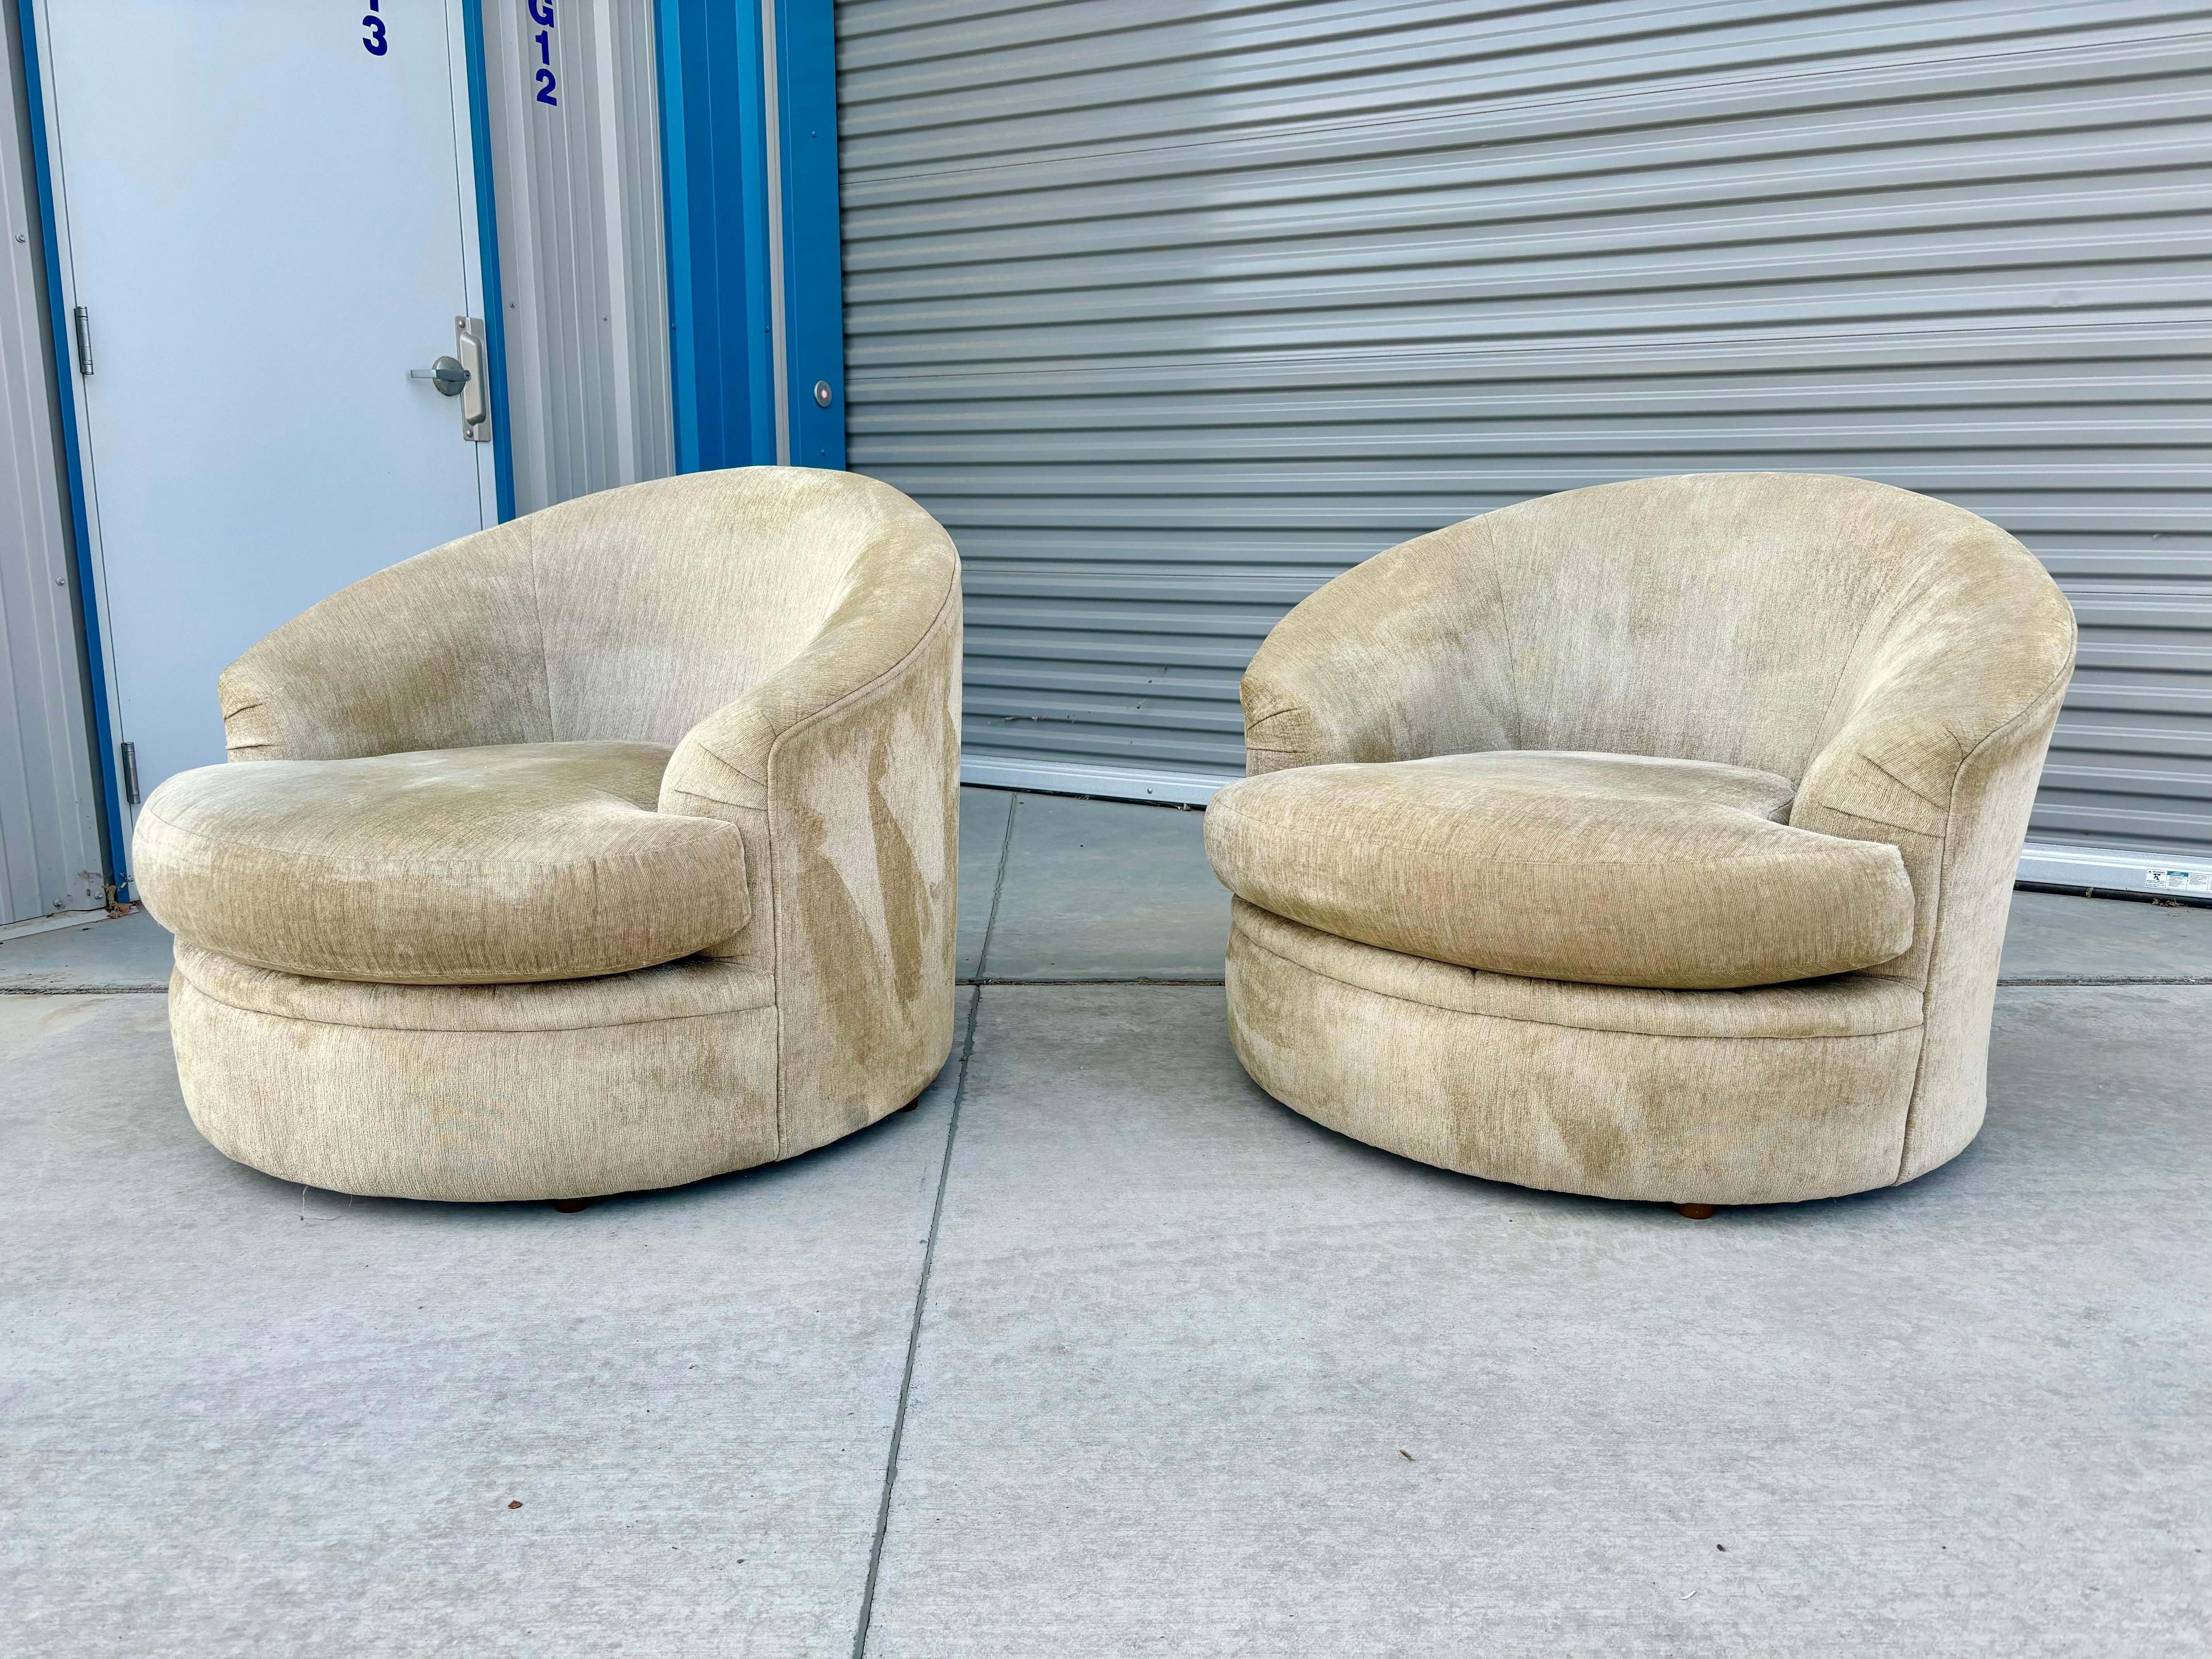 American 1970s Mid Century Modern Lounge Chairs - Set of 2 For Sale